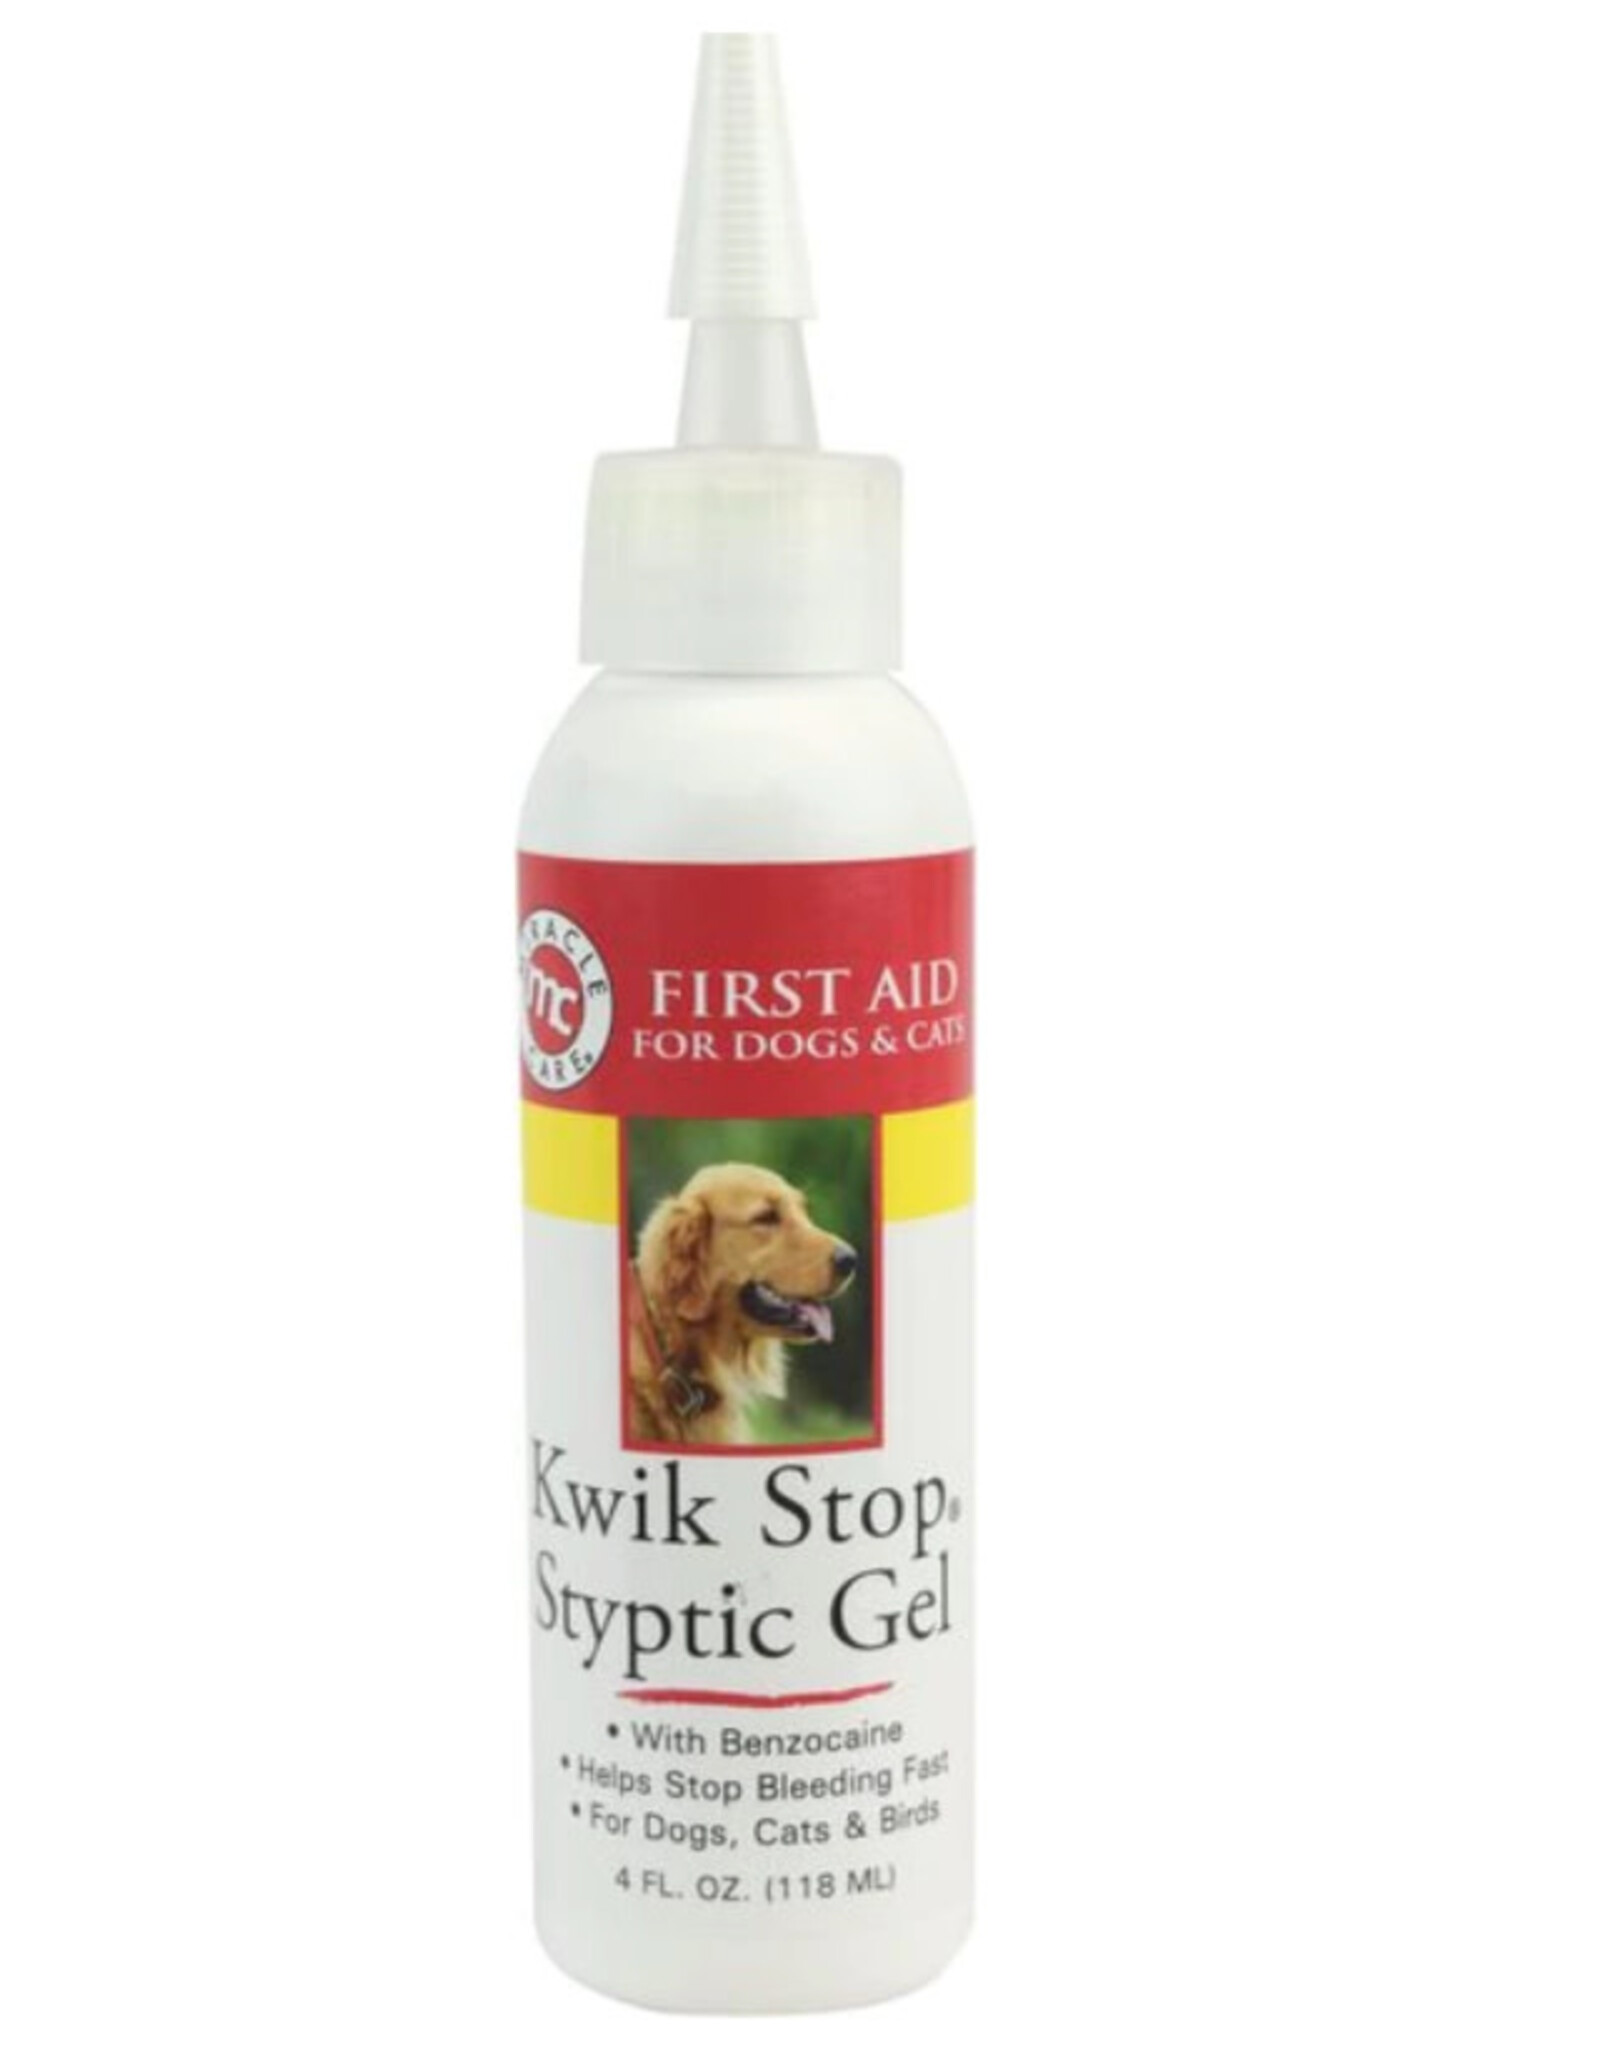 MIRACLE CARE MIRACLE CARE KWIK-STOP GEL 4OZ